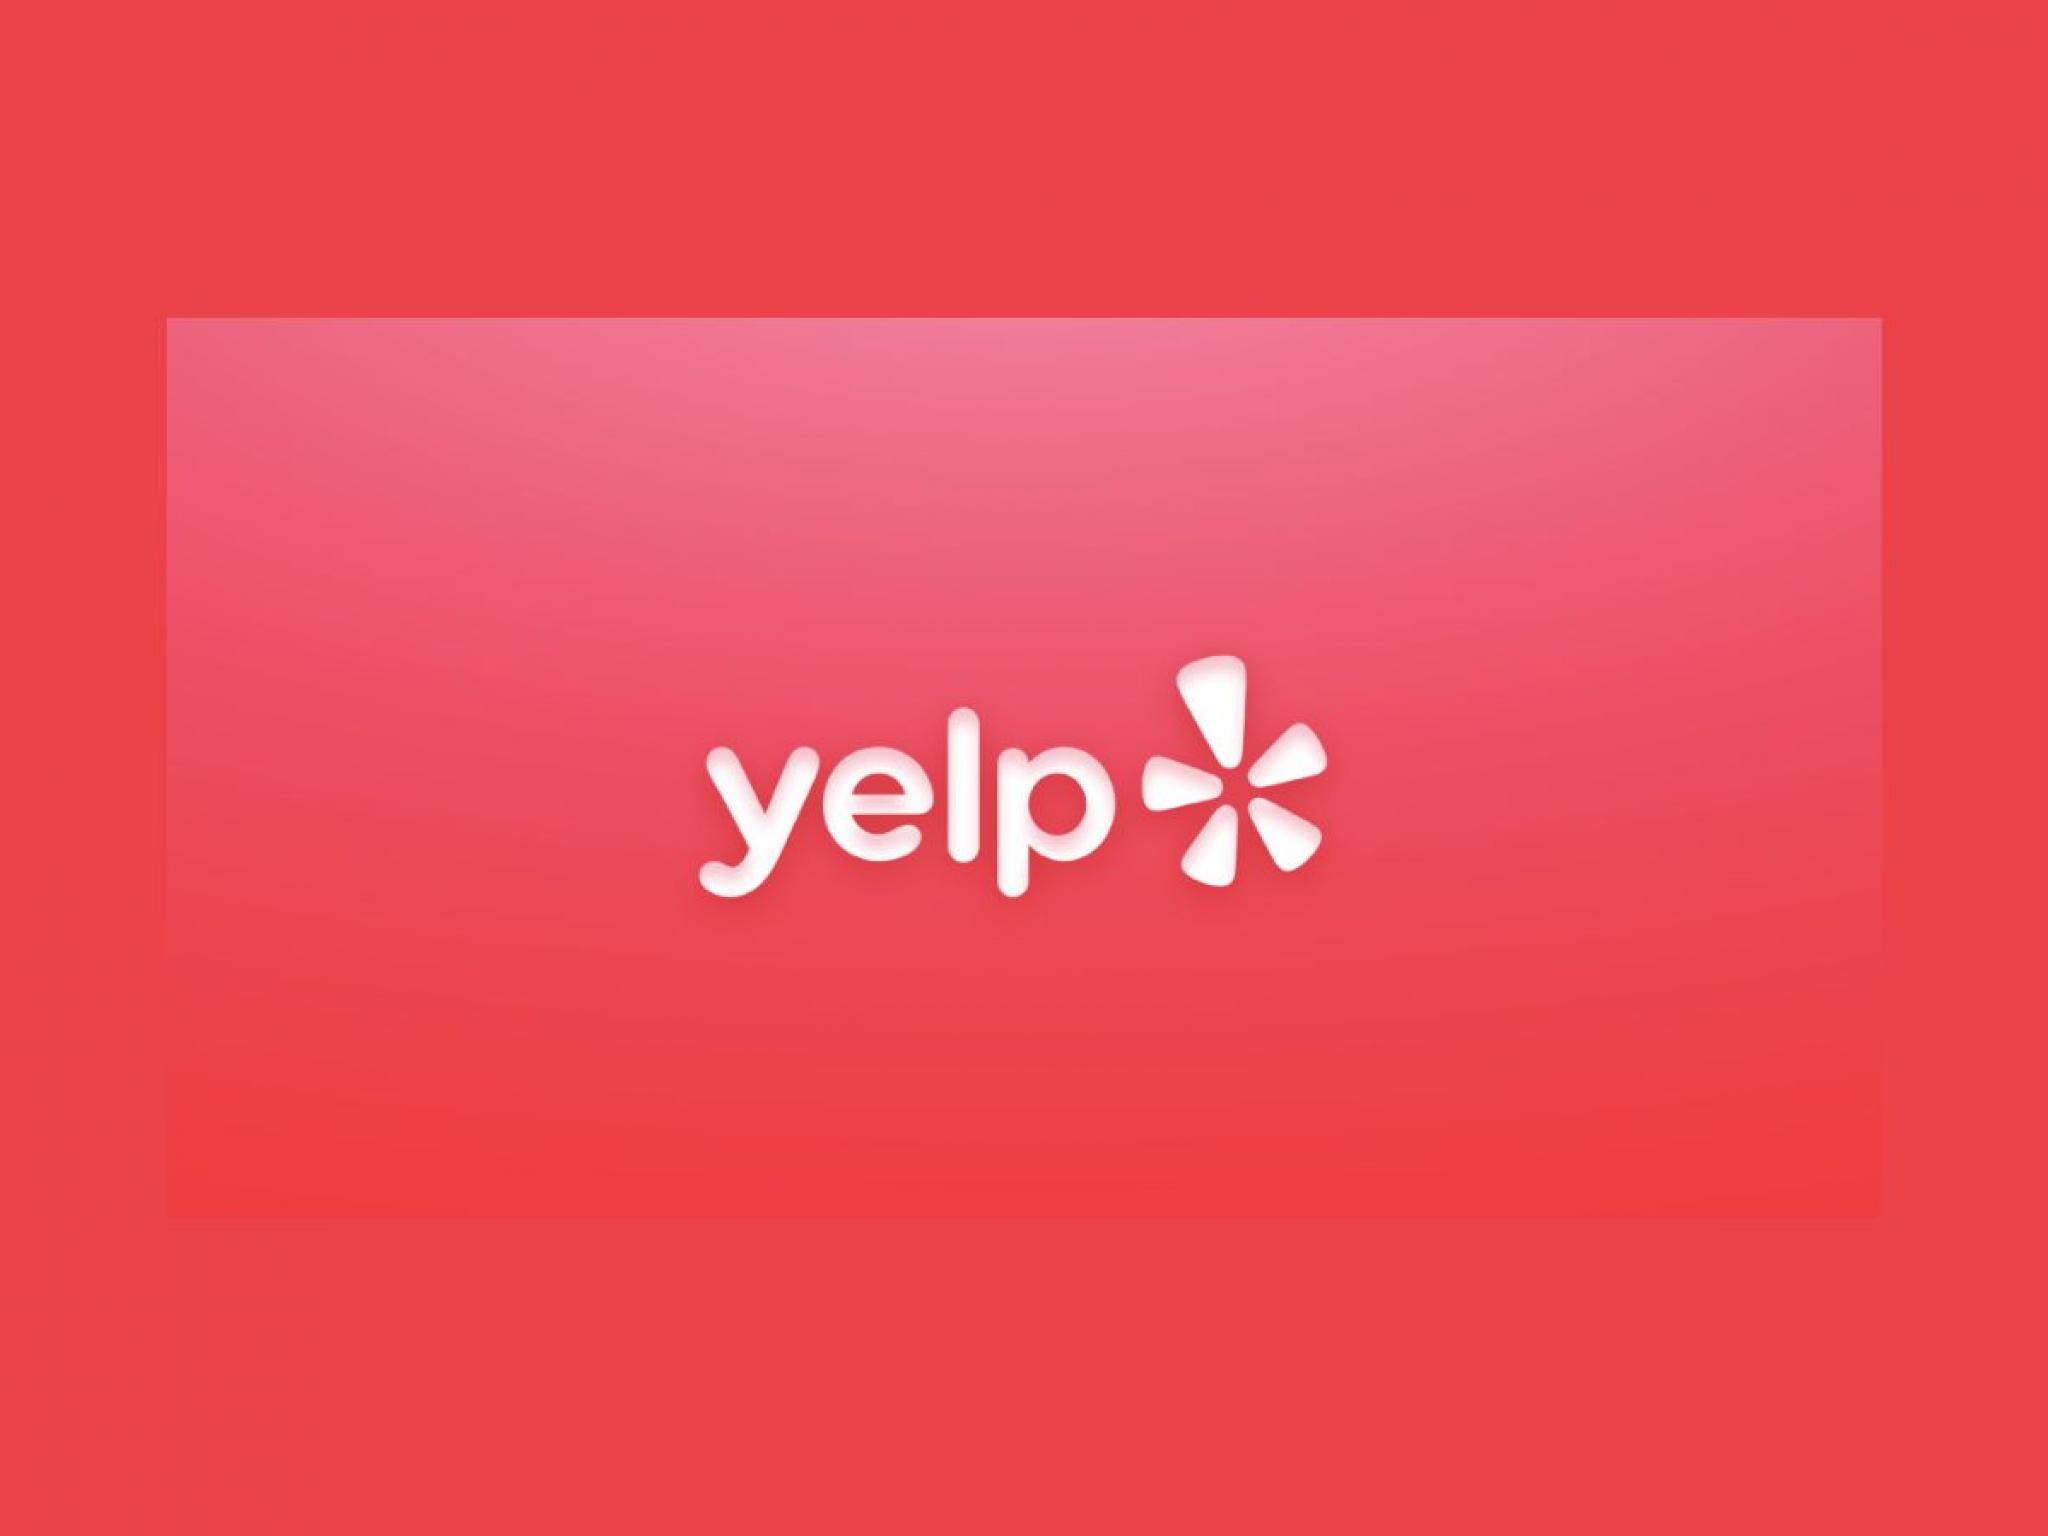  yelp-reports-q4-results-joins-roku-dropbox-and-other-big-stocks-moving-lower-in-fridays-pre-market-session 